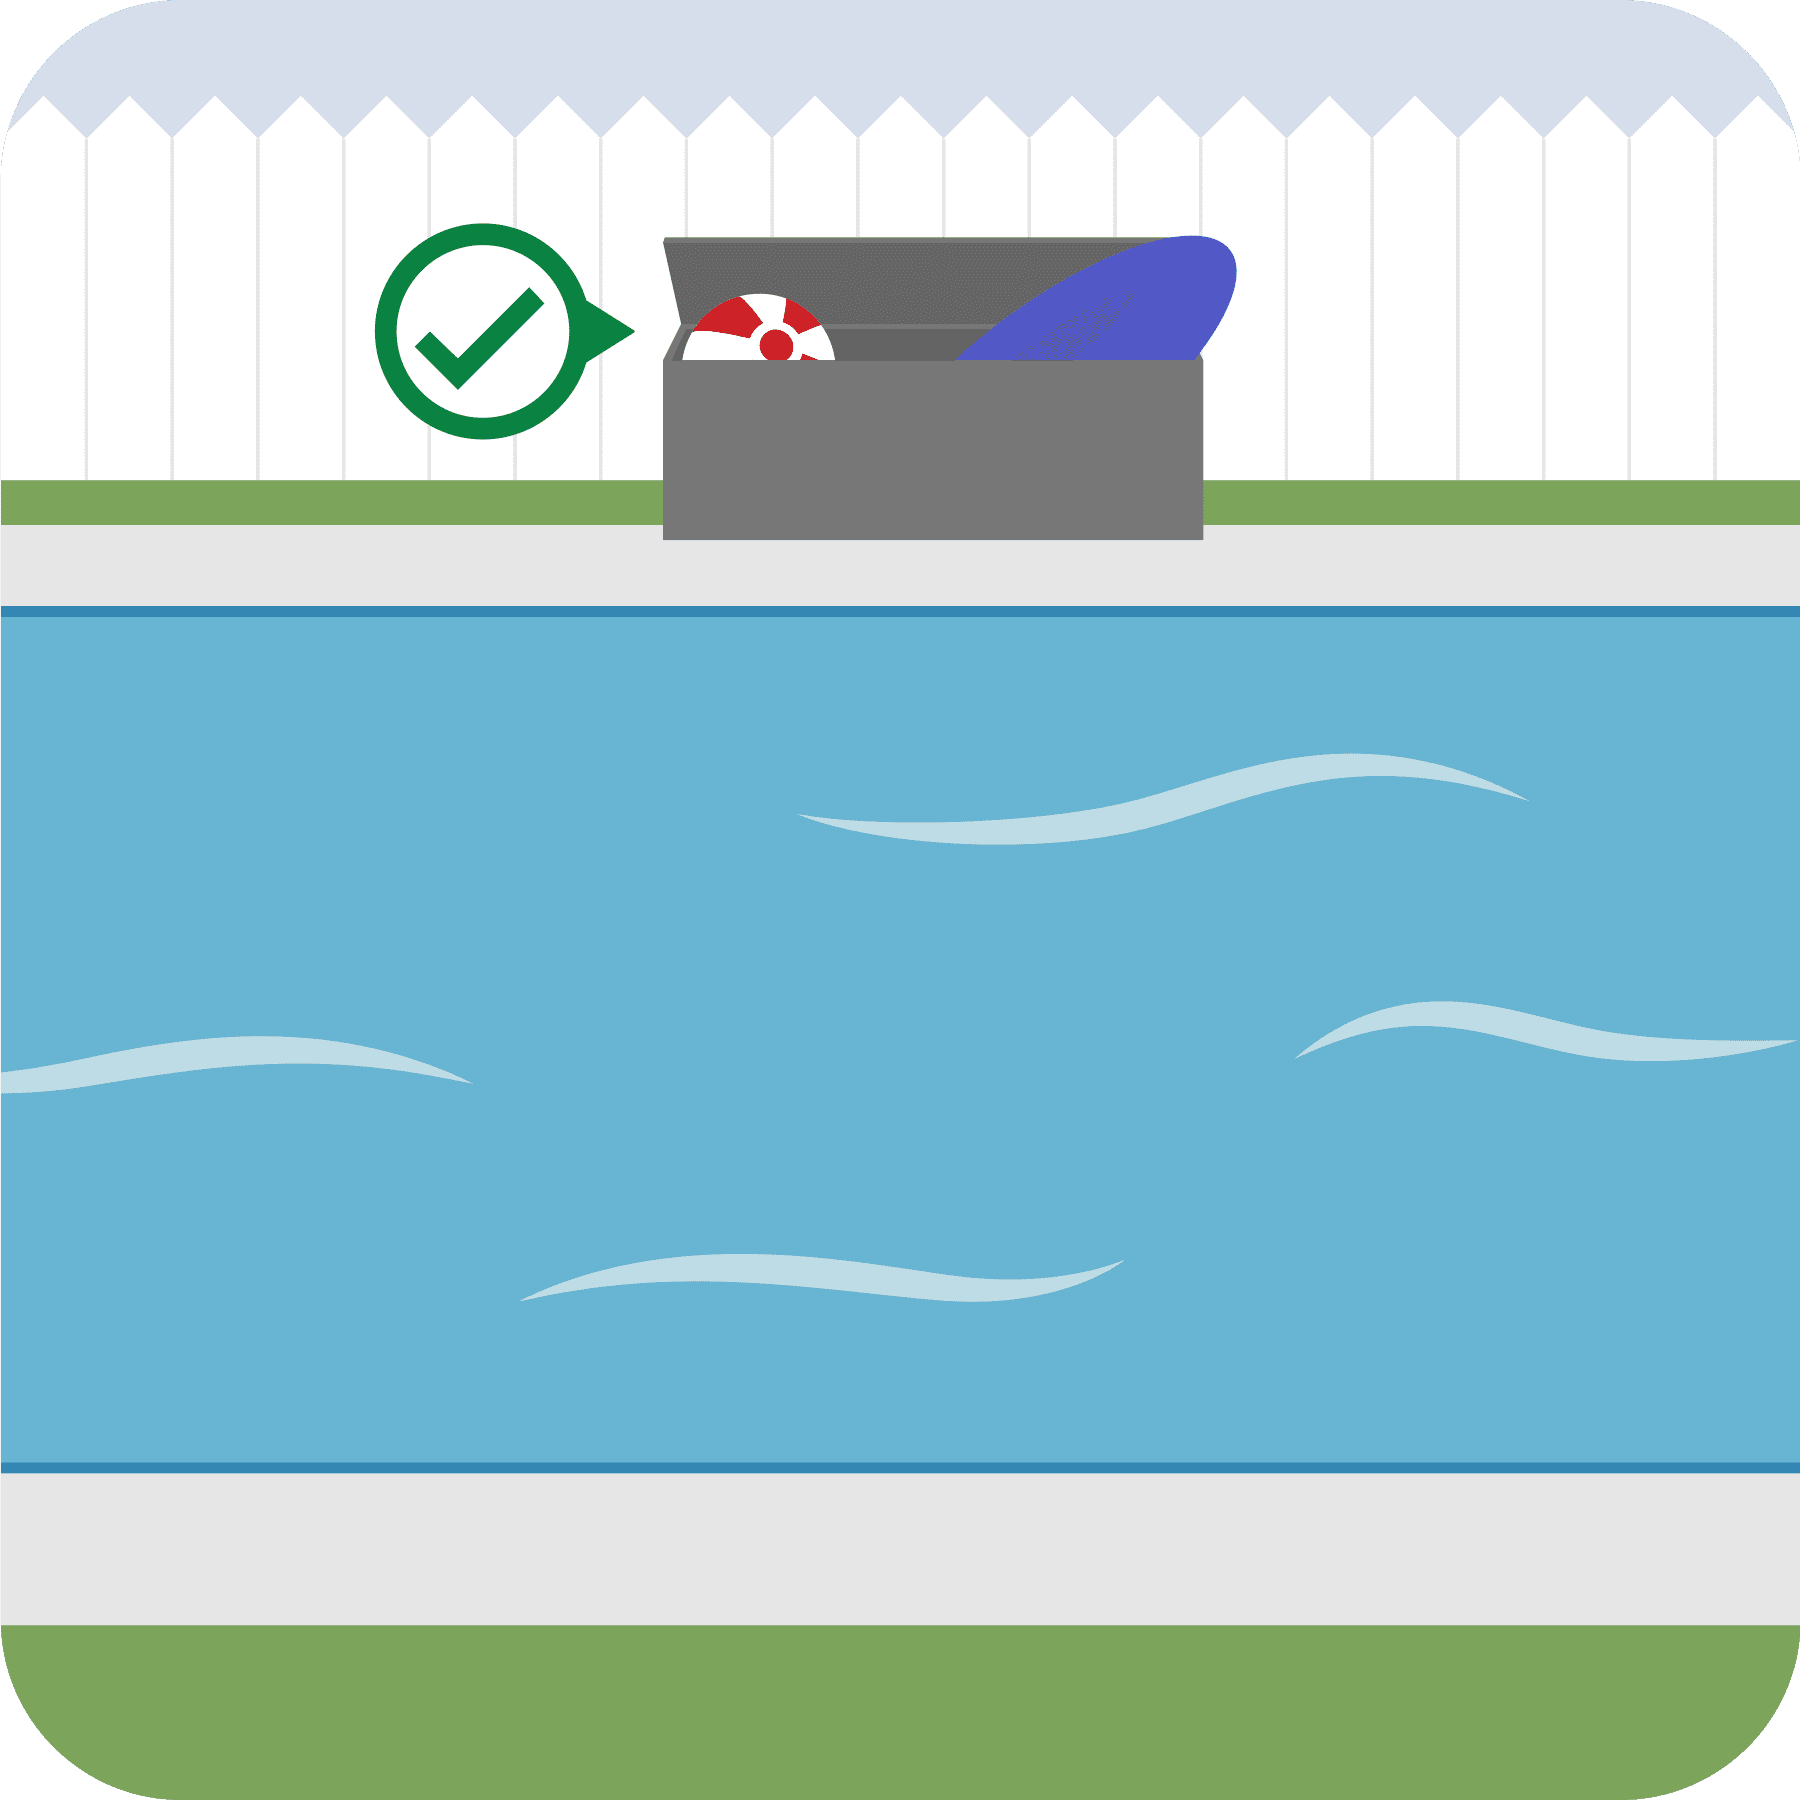 The float and ball are in a chest beside the pool with a green check.